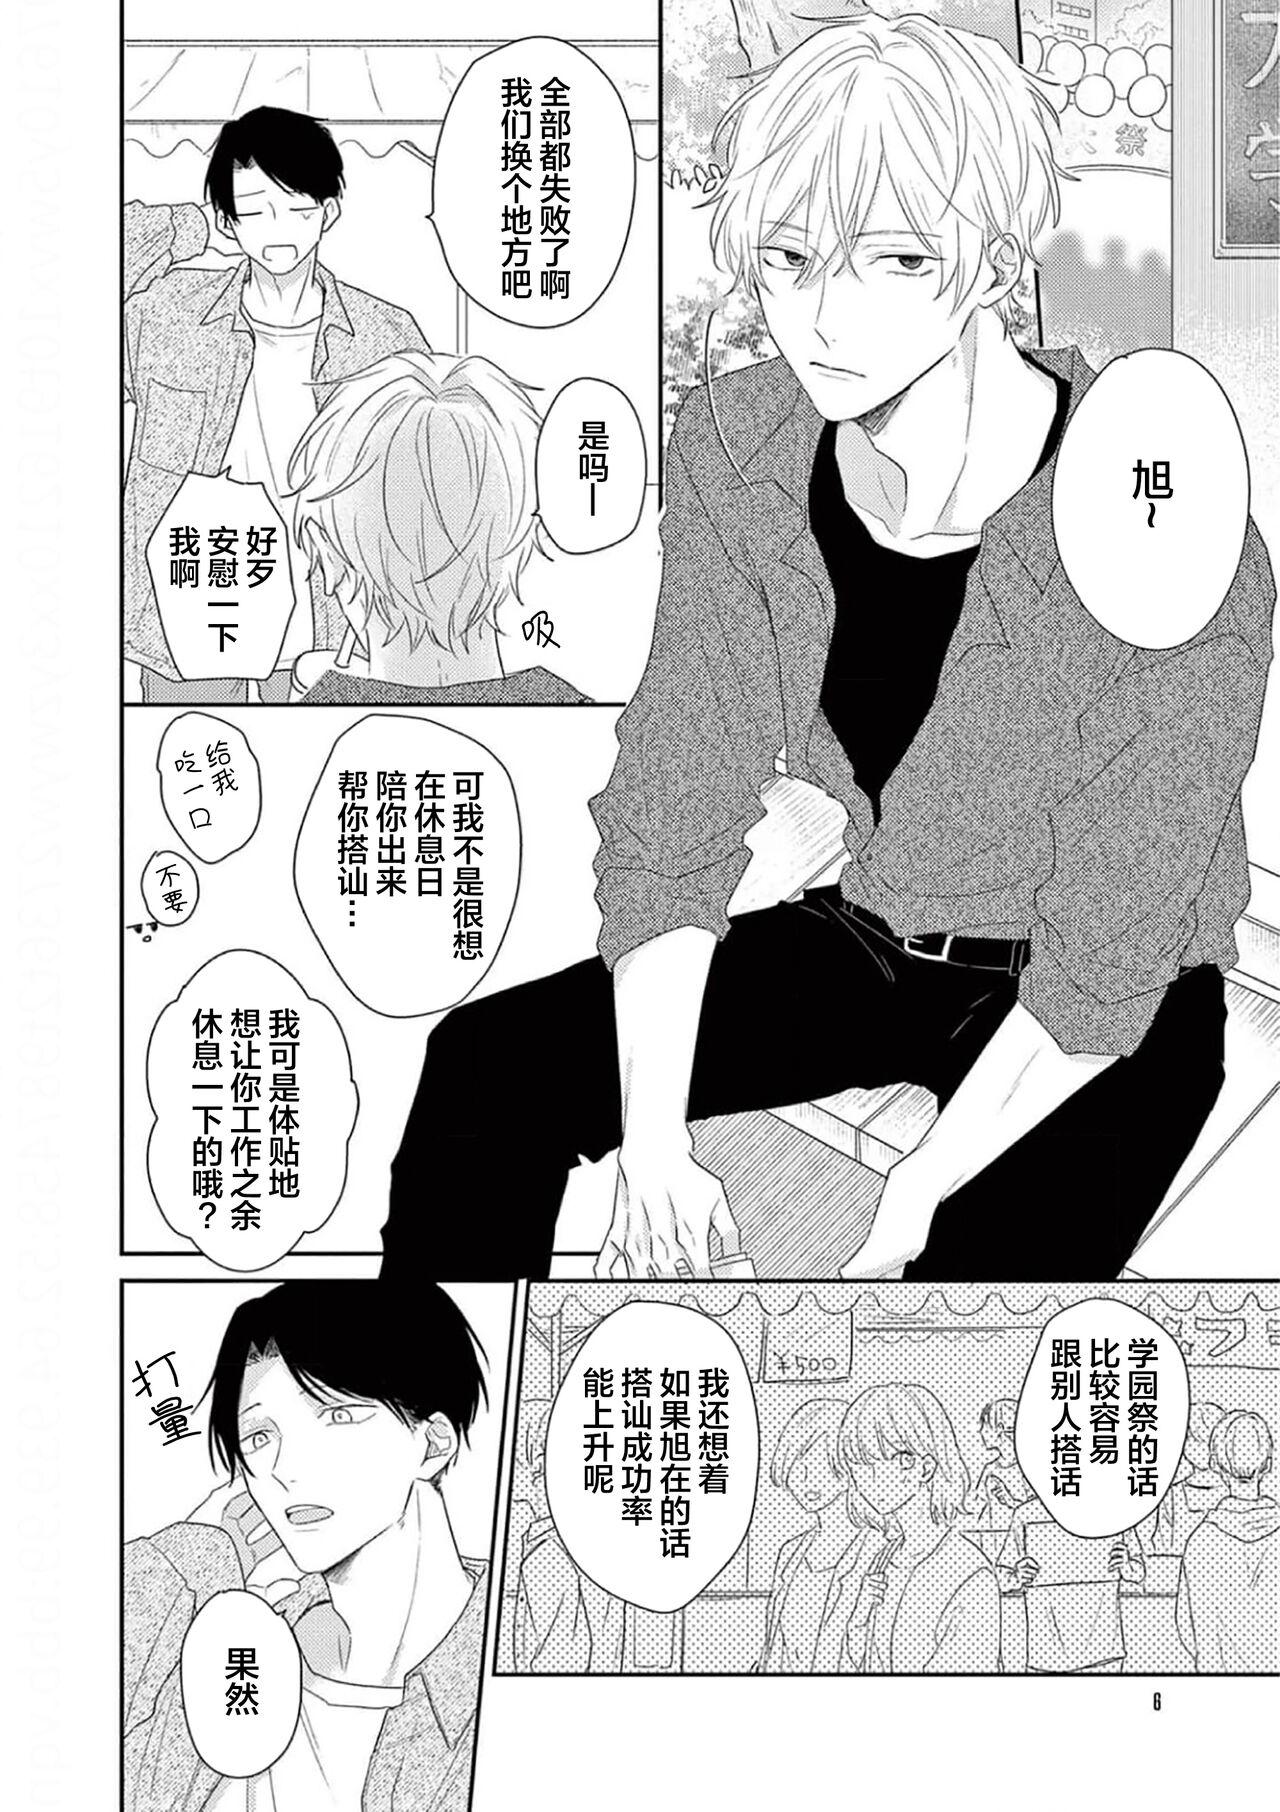 Urine Love Song ga Owaru made - Until The End of A Love Song | 直到这曲恋歌结束为止 Eurosex - Page 8